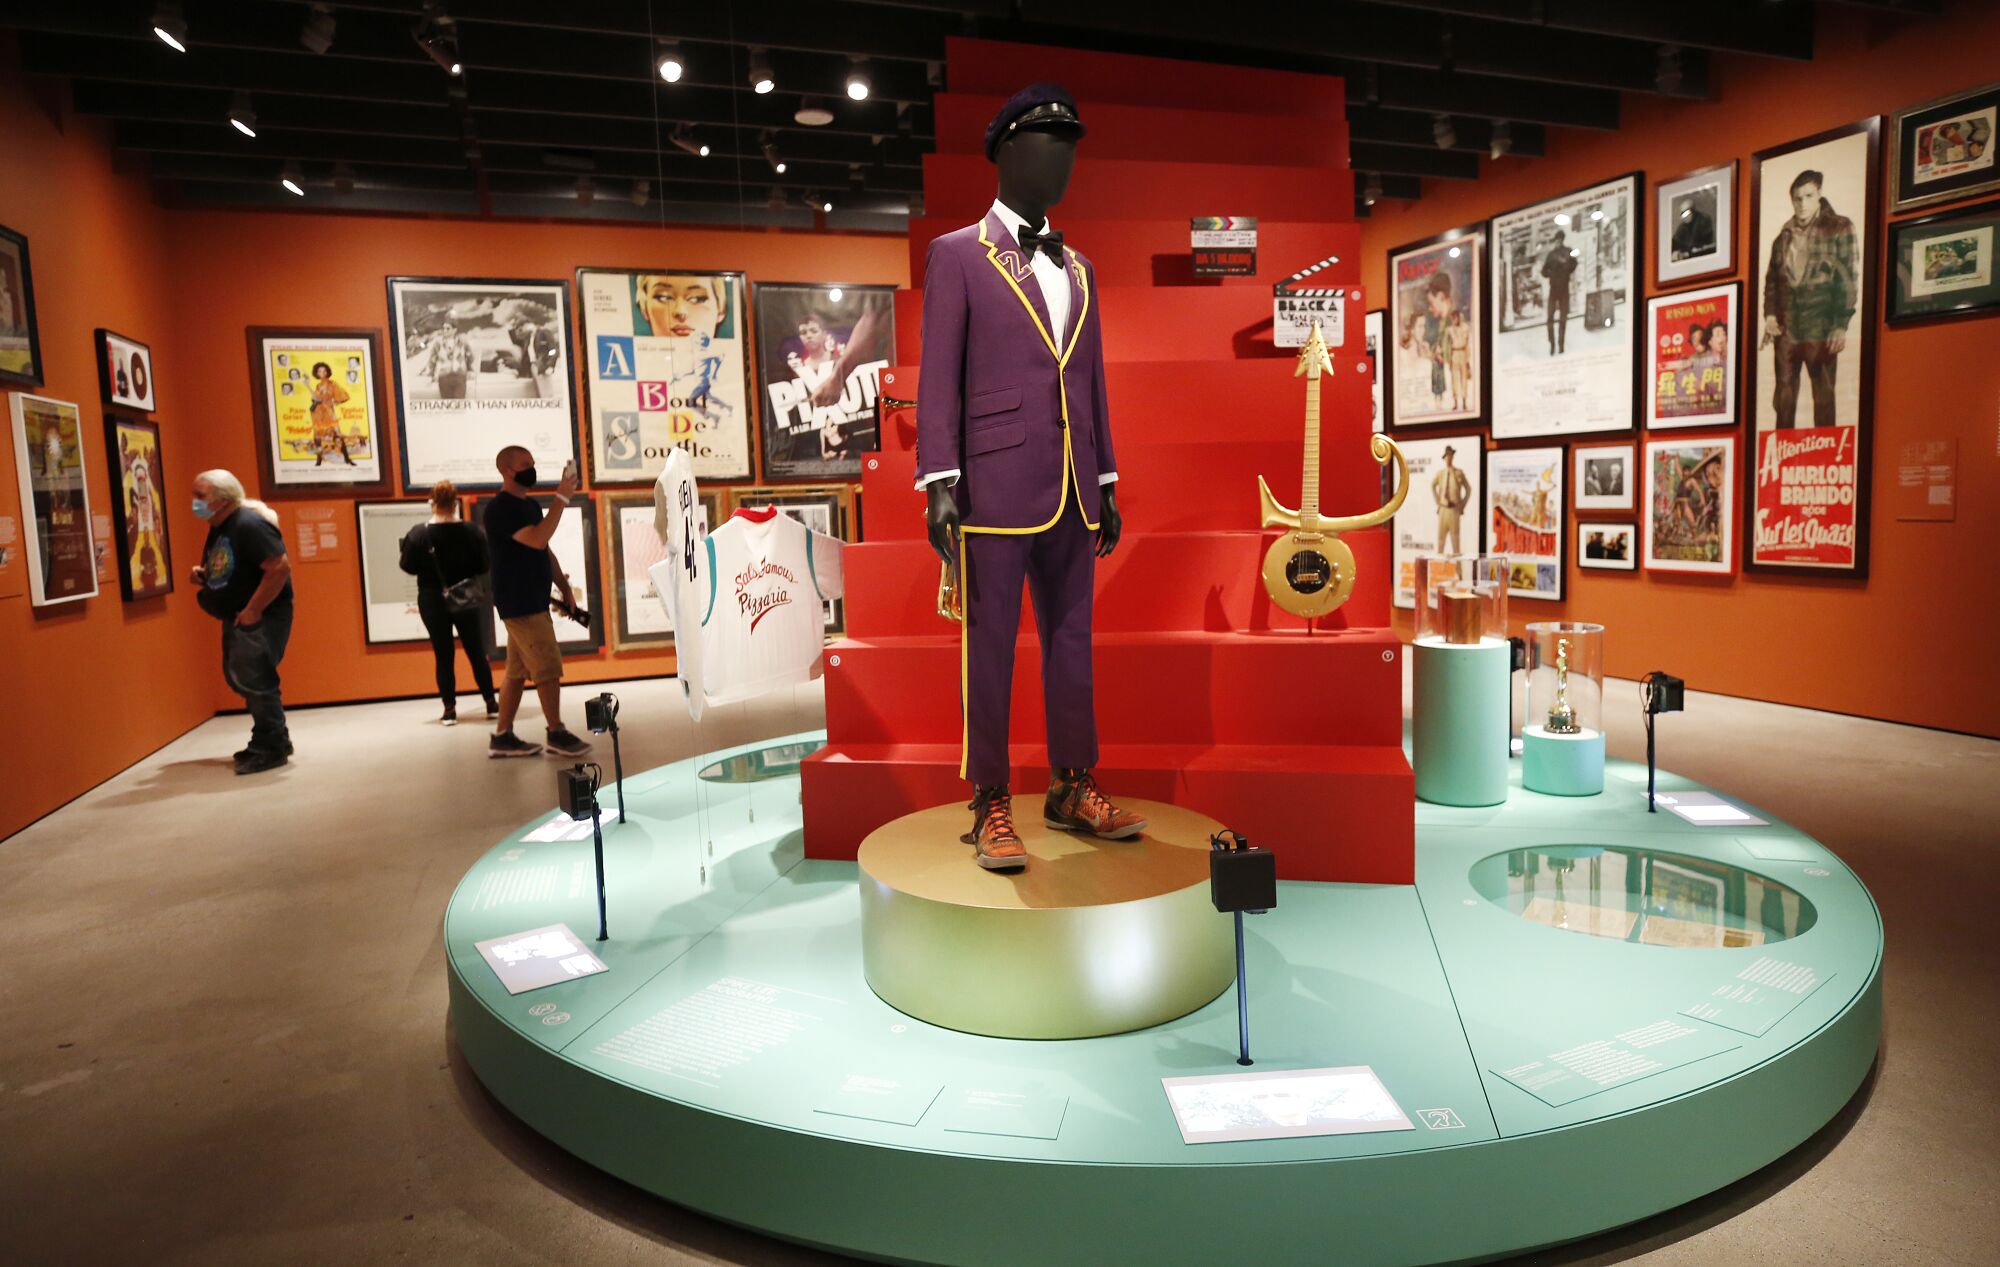 An exhibit at the Academy Museum focused on moviemaker Spike Lee features posters, costumes and other items from his career.